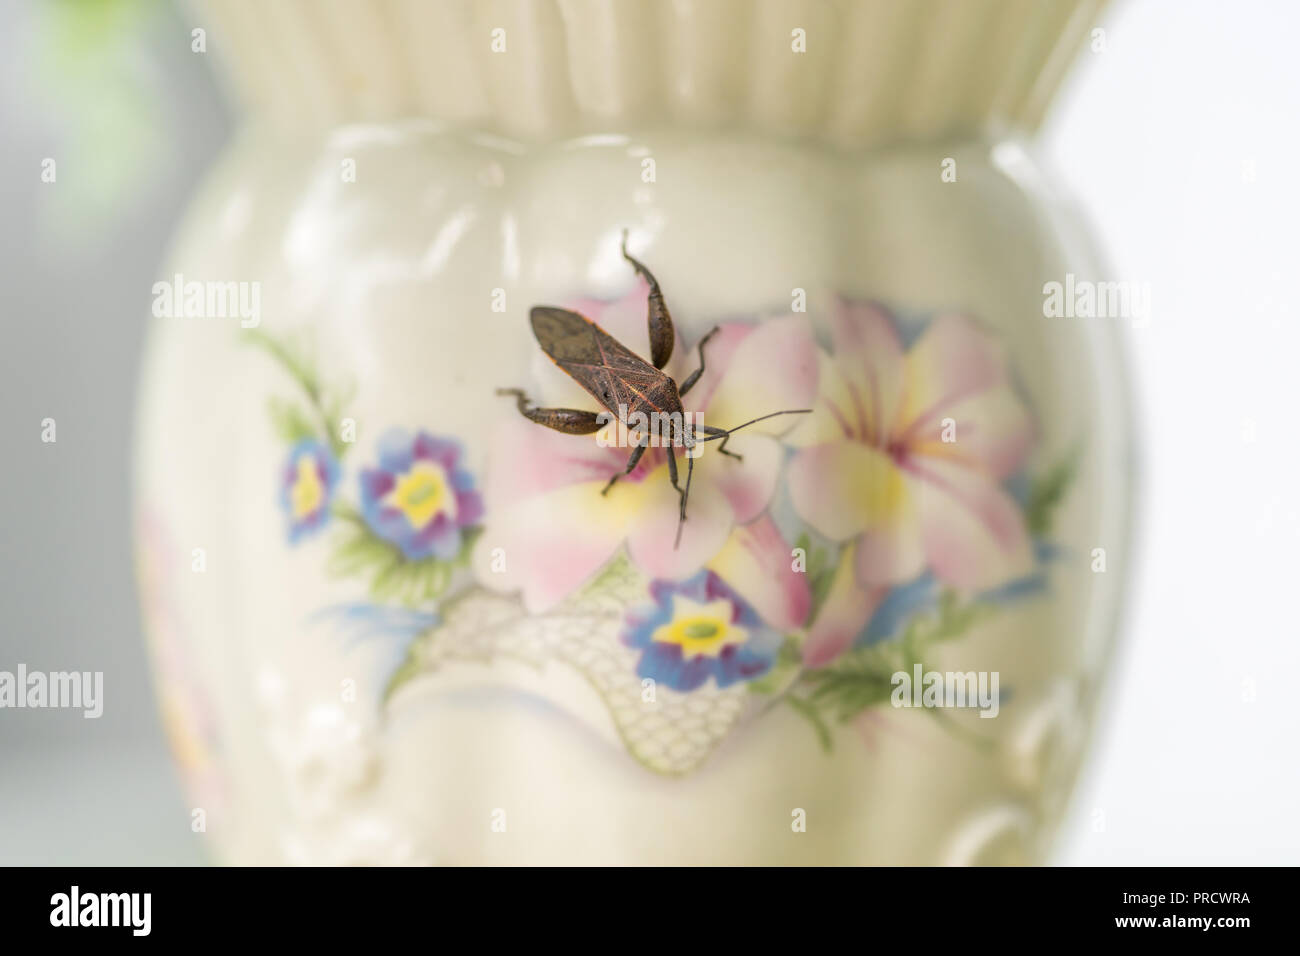 Art bug, a bug on a beautiful floral vase. Stock Photo